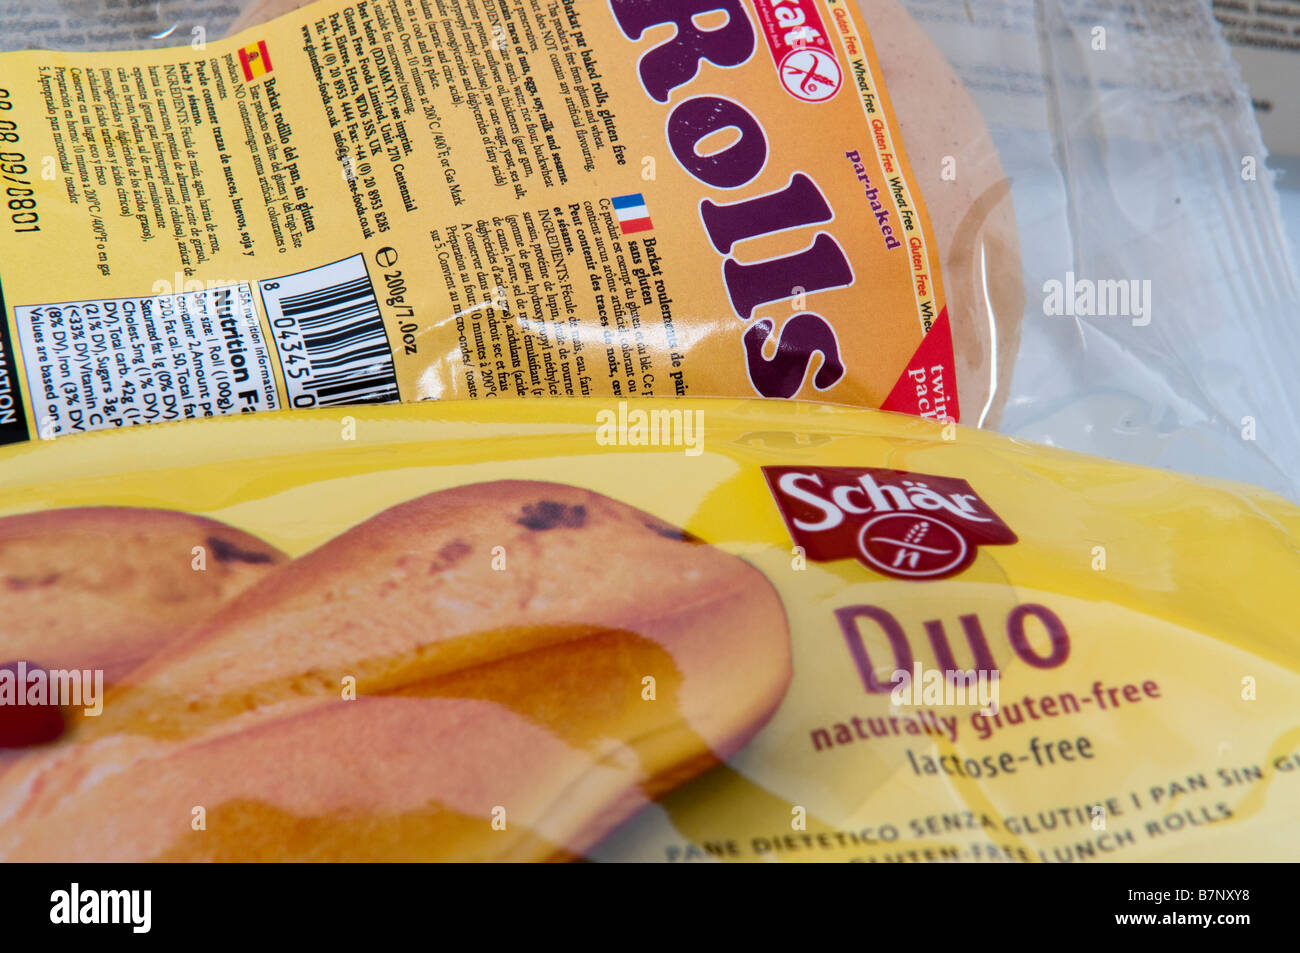 Gluten free rolls/bread in packaging, from Schär (Schar) and Barkat, available from UK on prescription Stock Photo